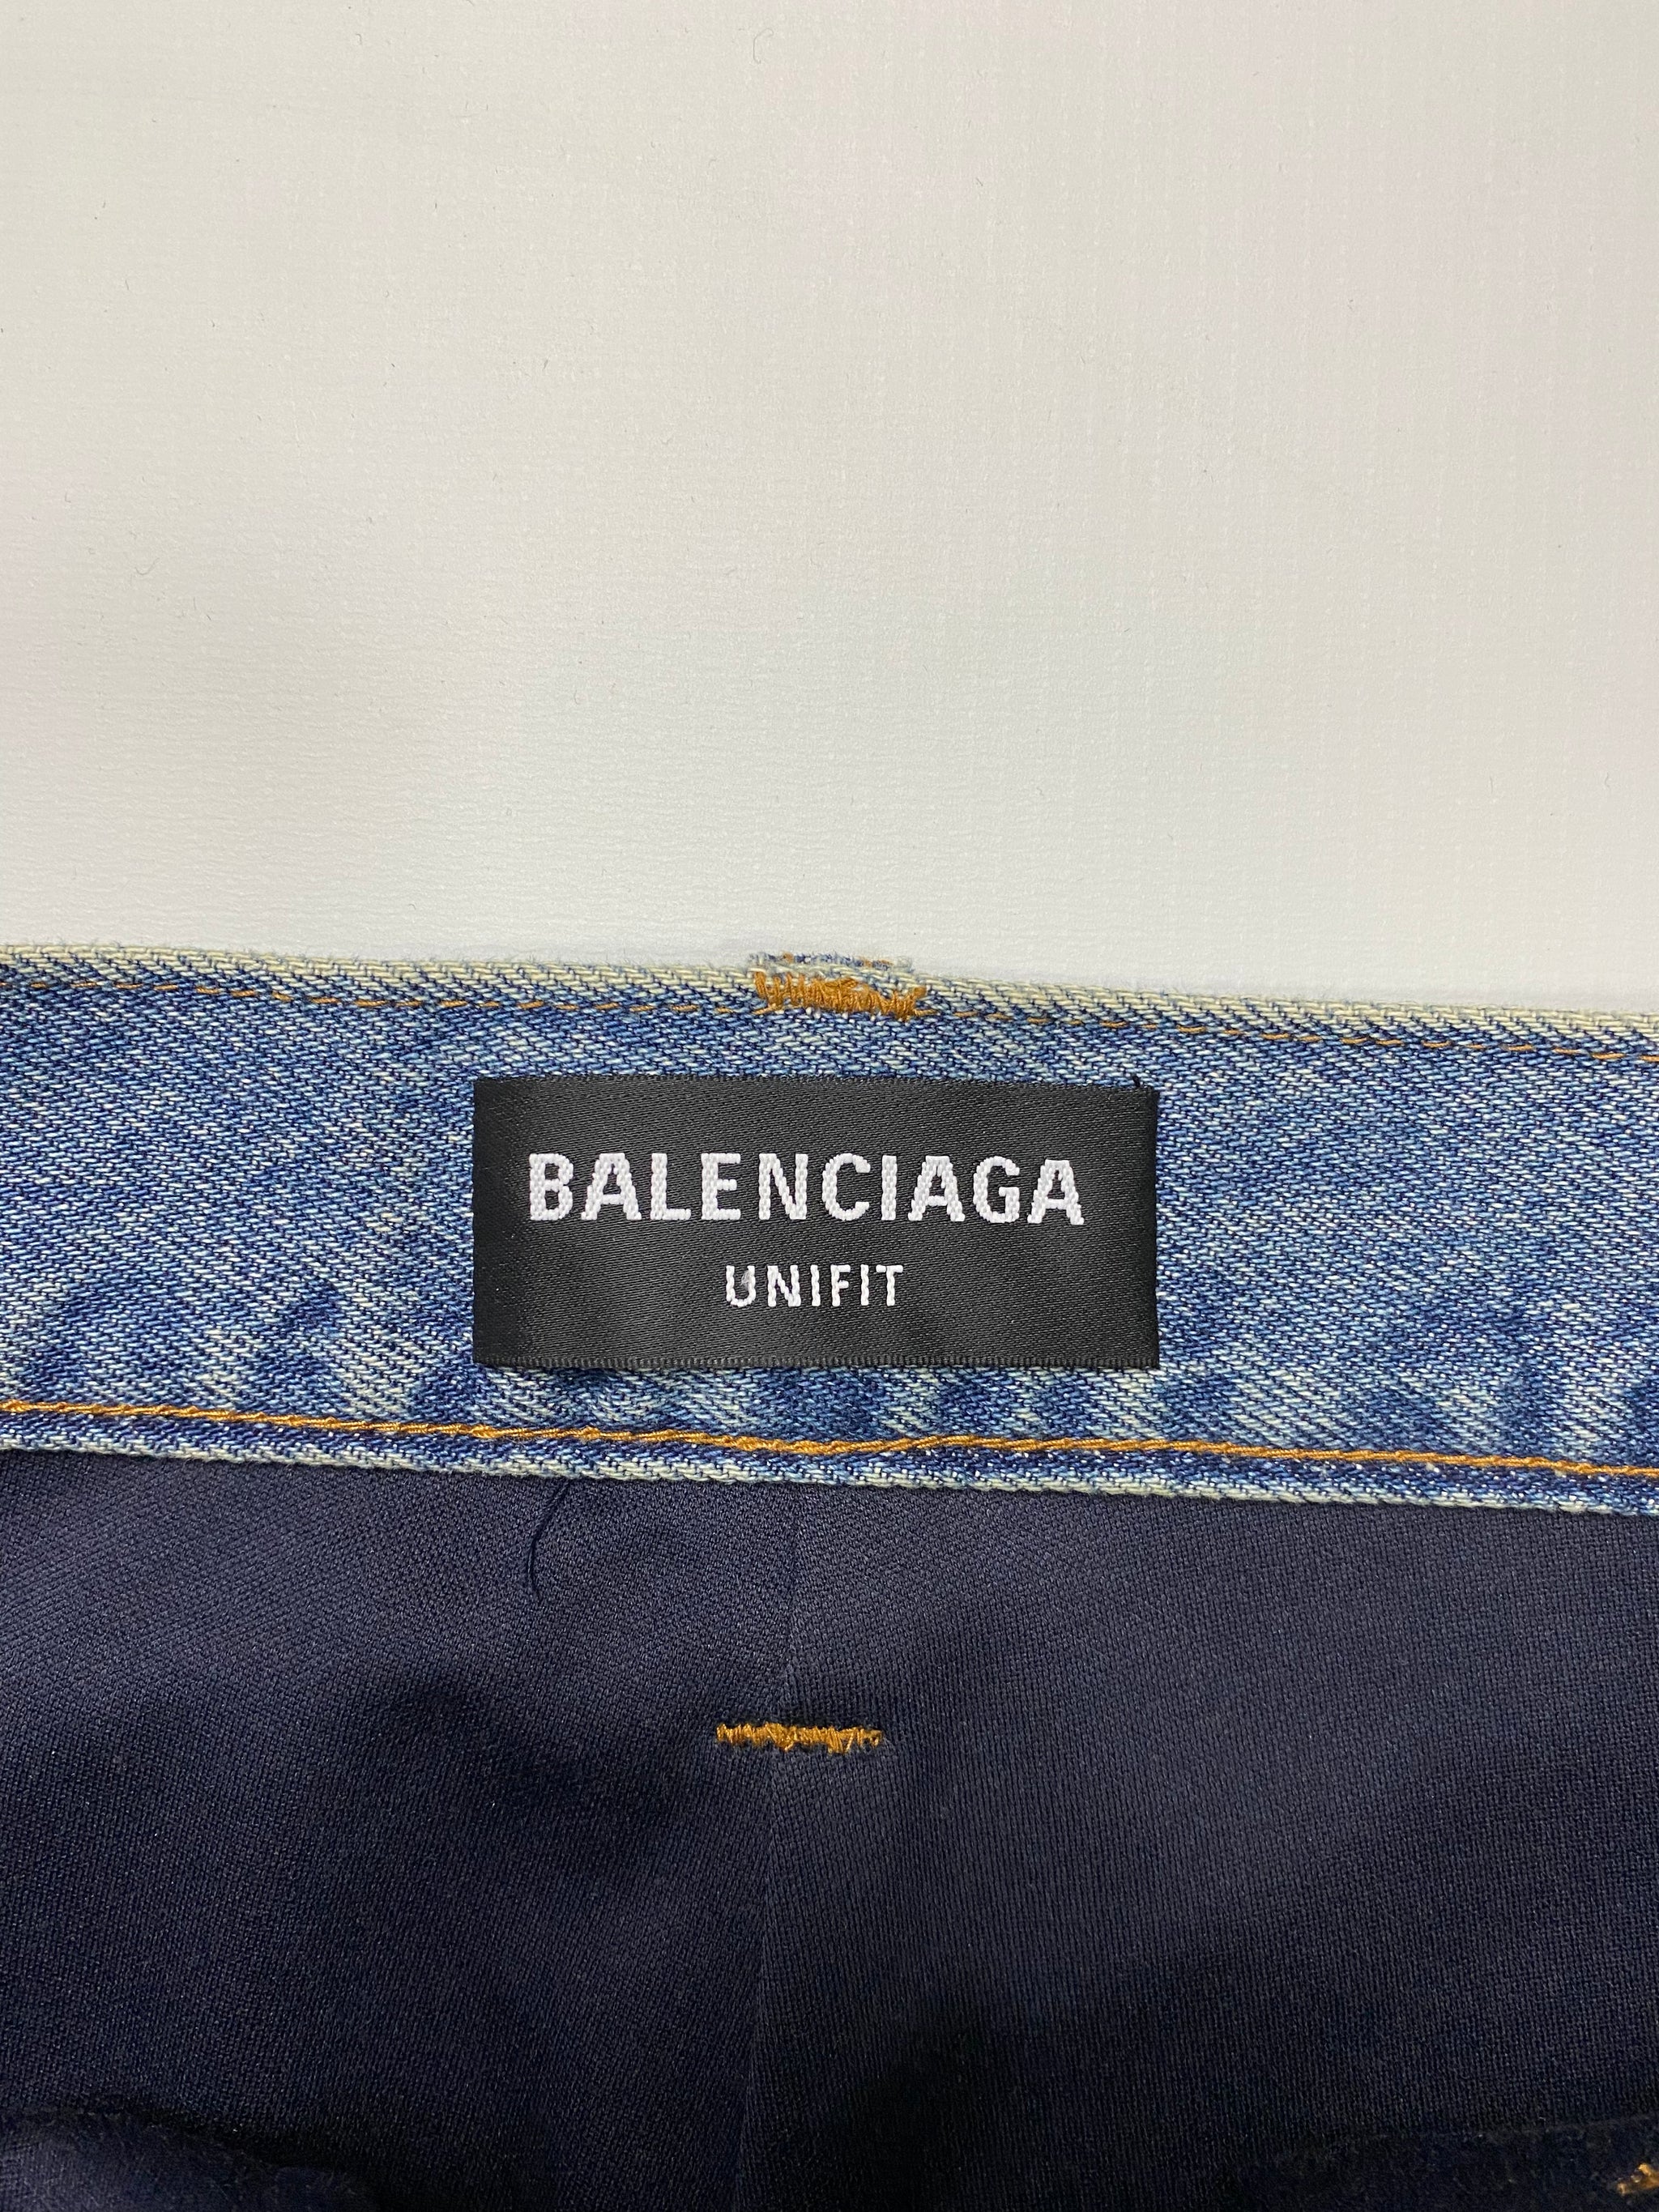 BALENCIAGA AW21 destroyed ripped layered baggy blue jeans SIZE:XS|S ...